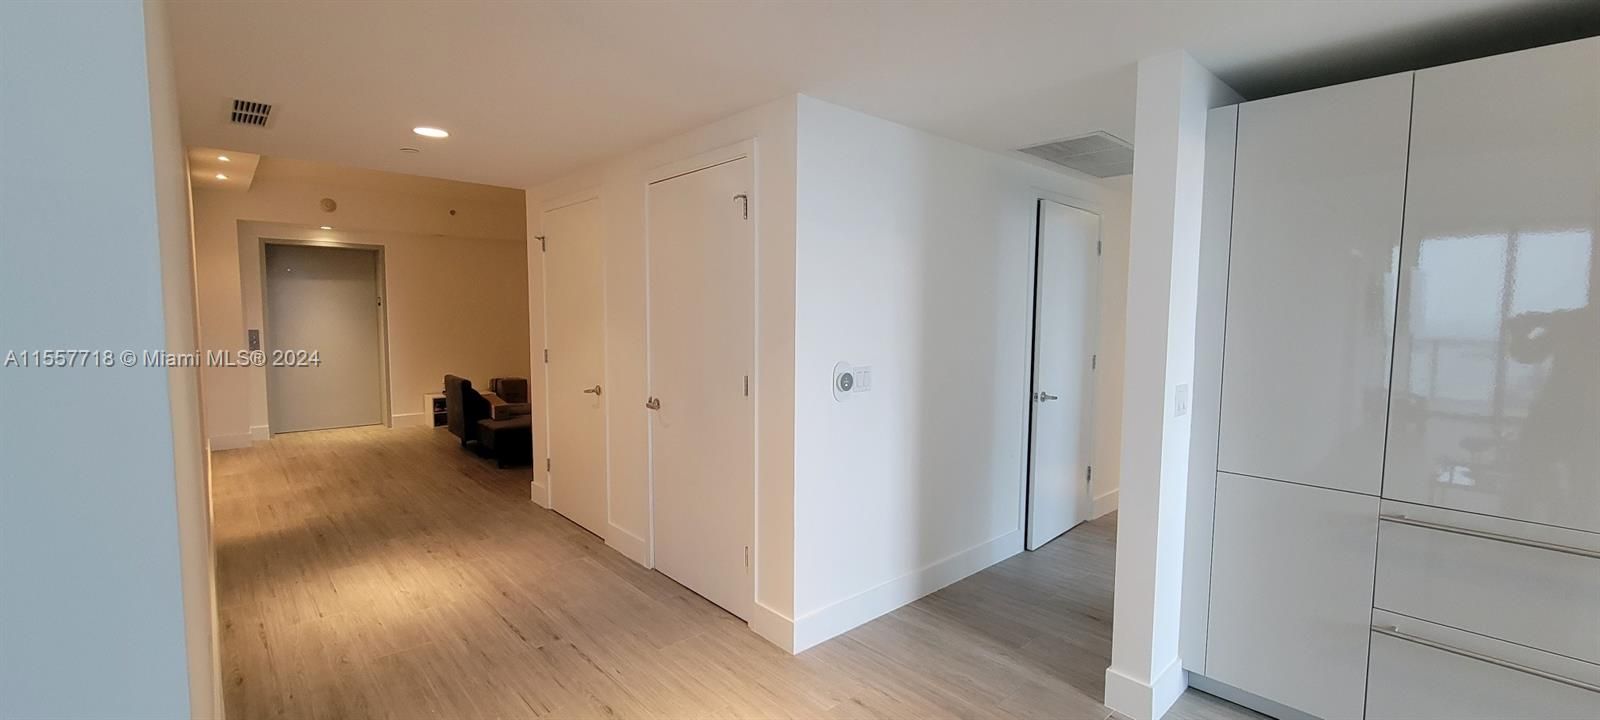 Private Elevator, Entrance to Family Room, Hallway to 2/3rd bedrooms